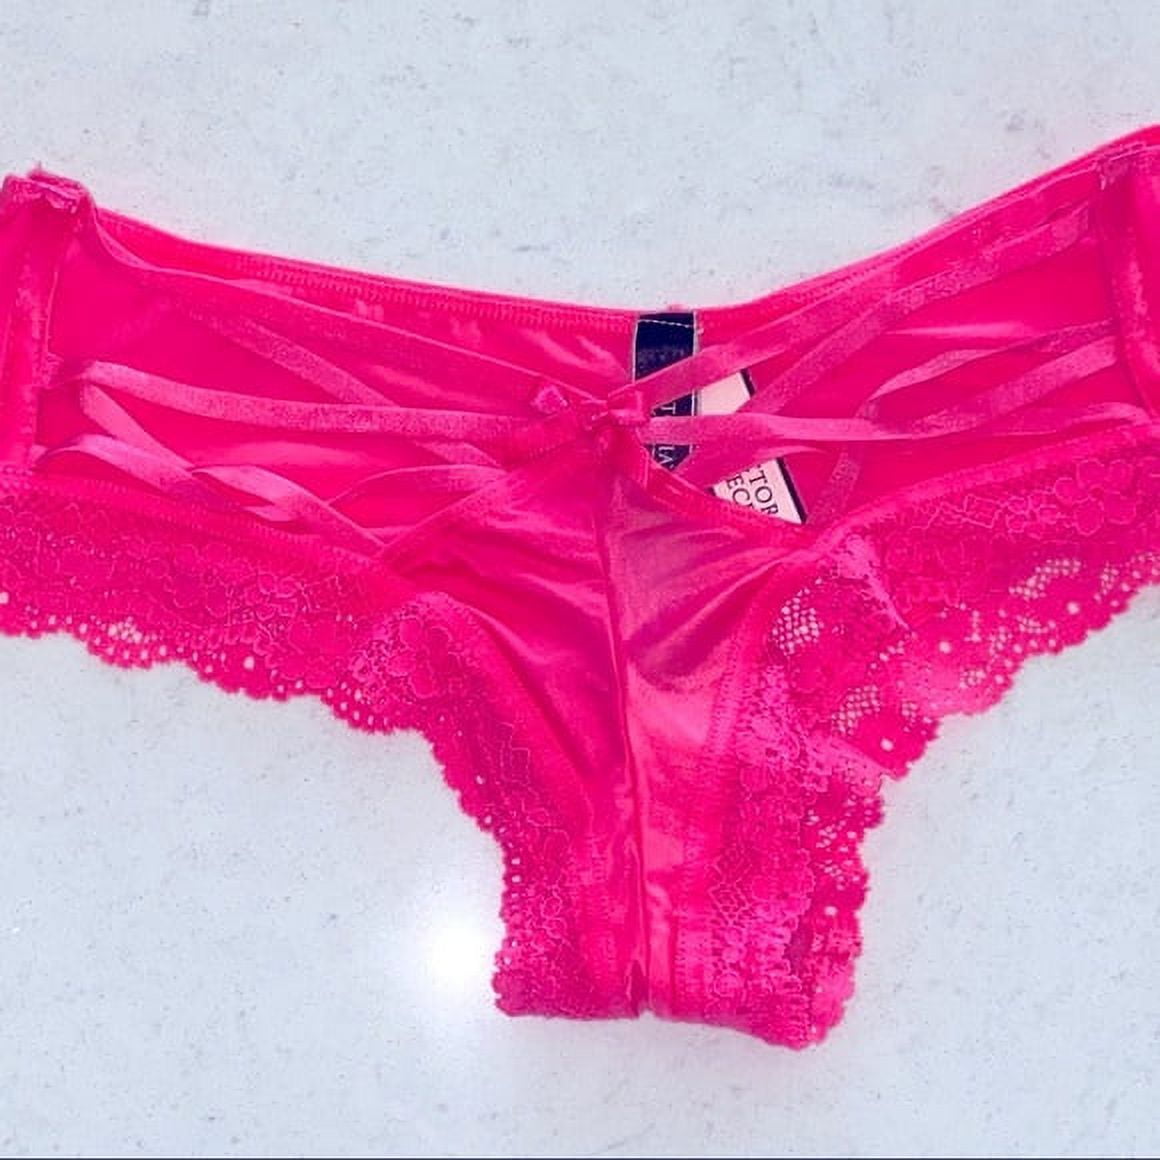 Victoria's Secret PINK - Give yourself the gift of more comfort and less  worry with PINK Period Panties ☺️